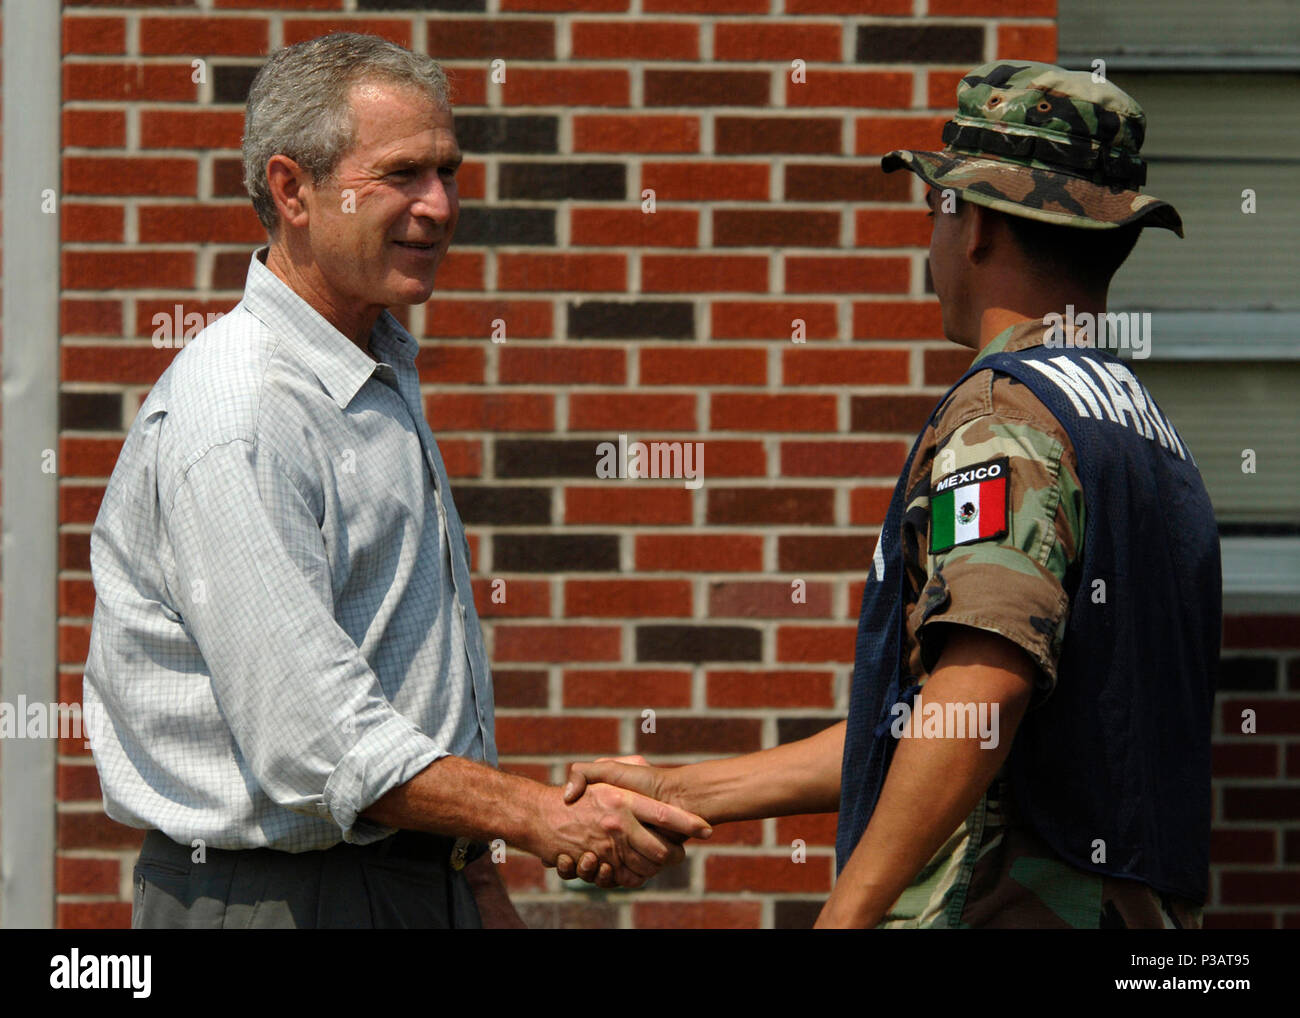 Miss. (Sept. 12, 2005) - President George W. Bush conveys his gratitude to a marine from the Federal Republic of Mexico, on their clean up efforts at 28 Street Elementary School in Biloxi, Miss. President Bush is currently visiting the Gulf Coast region to assess the damage and disaster recovery efforts from Hurricane Katrina. The Mexican Navy is assisting the U.S. Navy in providing humanitarian assistance to victims of Hurricane Katrina. The Navy's involvement in the humanitarian assistance operations are being led by the Federal Emergency Management Agency (FEMA), in conjunction with the Dep Stock Photo